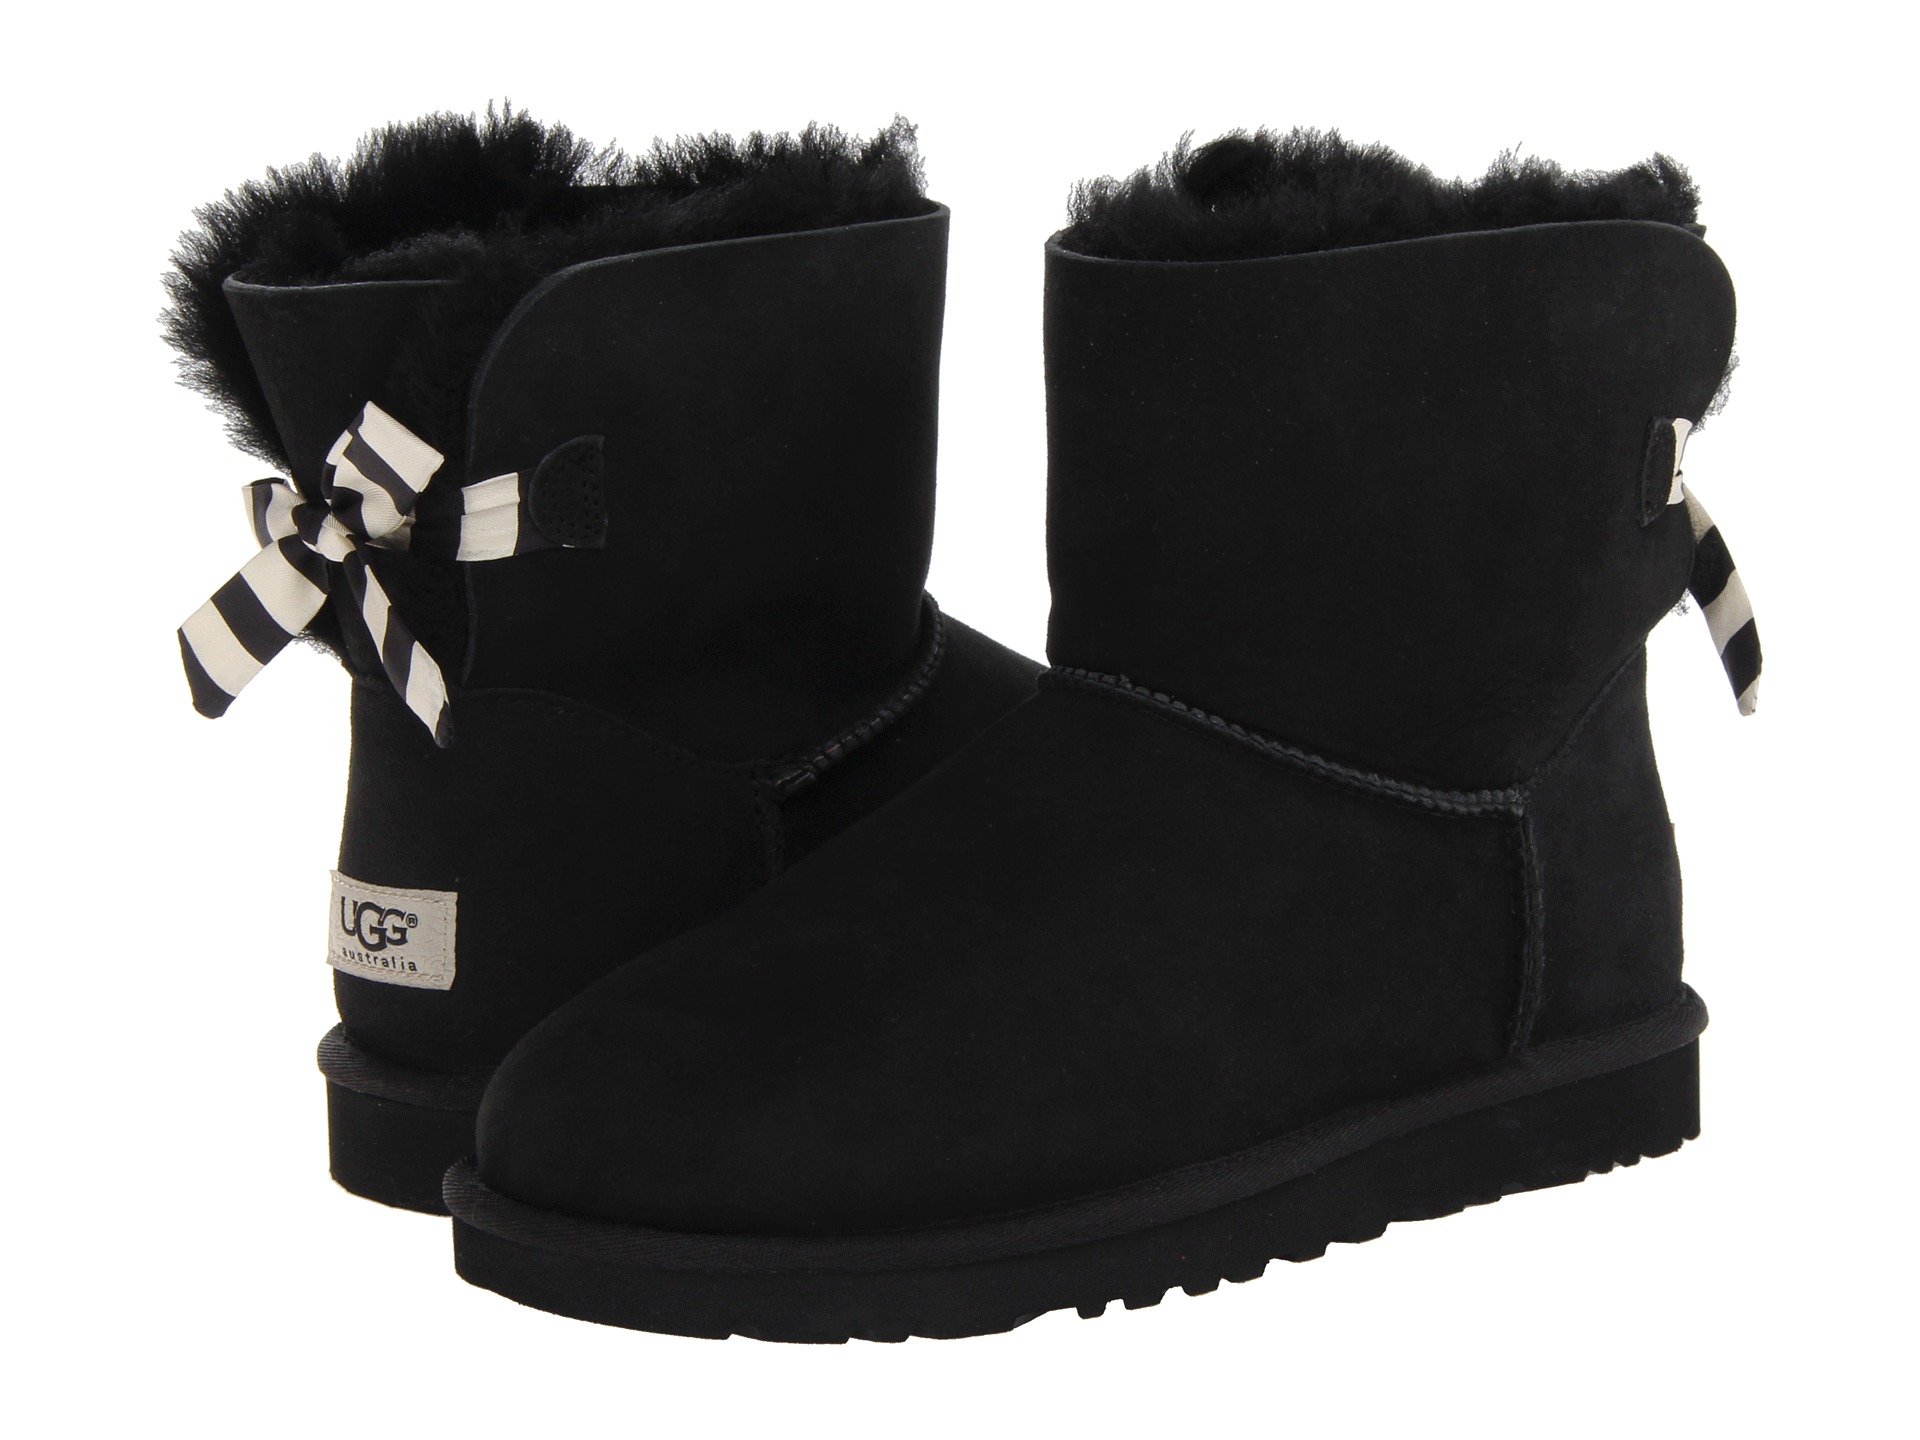 Ugg Mini Bailey Bow Stripe Black Twinface | Shipped Free at Zappos